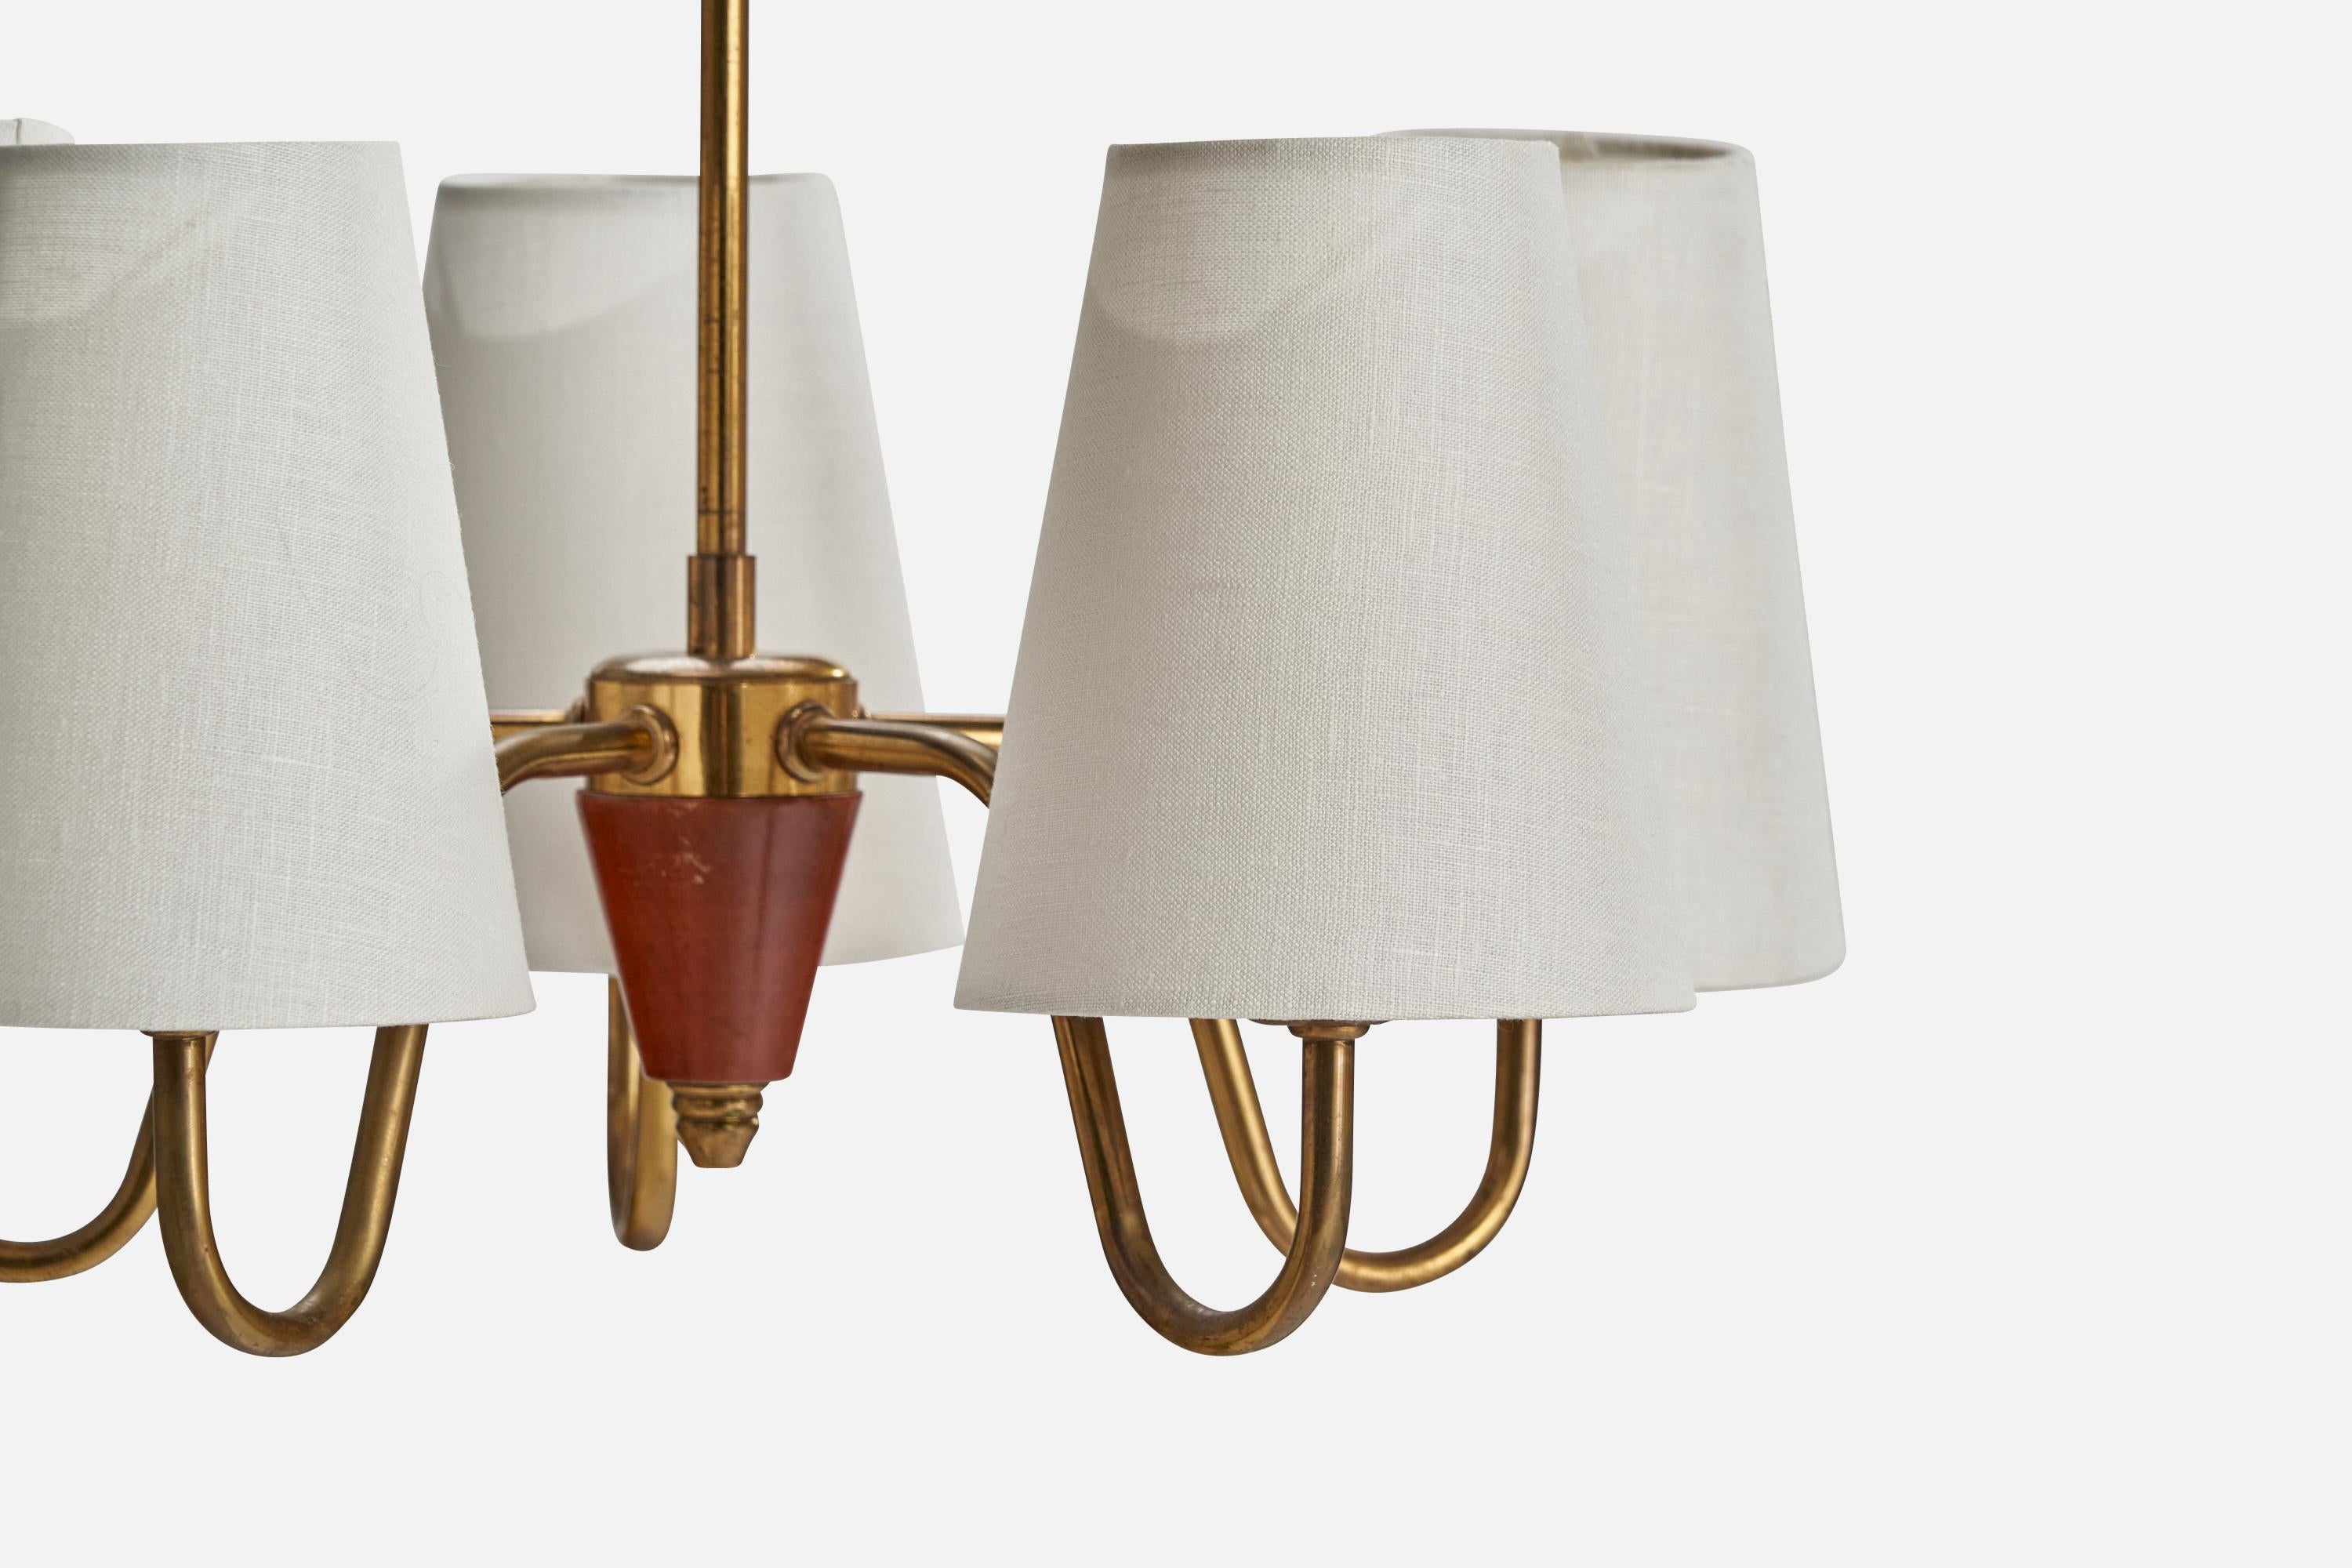 Fog & Mørup, Chandelier, Brass, Fabric, Wood, Denmark, 1940s In Good Condition For Sale In High Point, NC